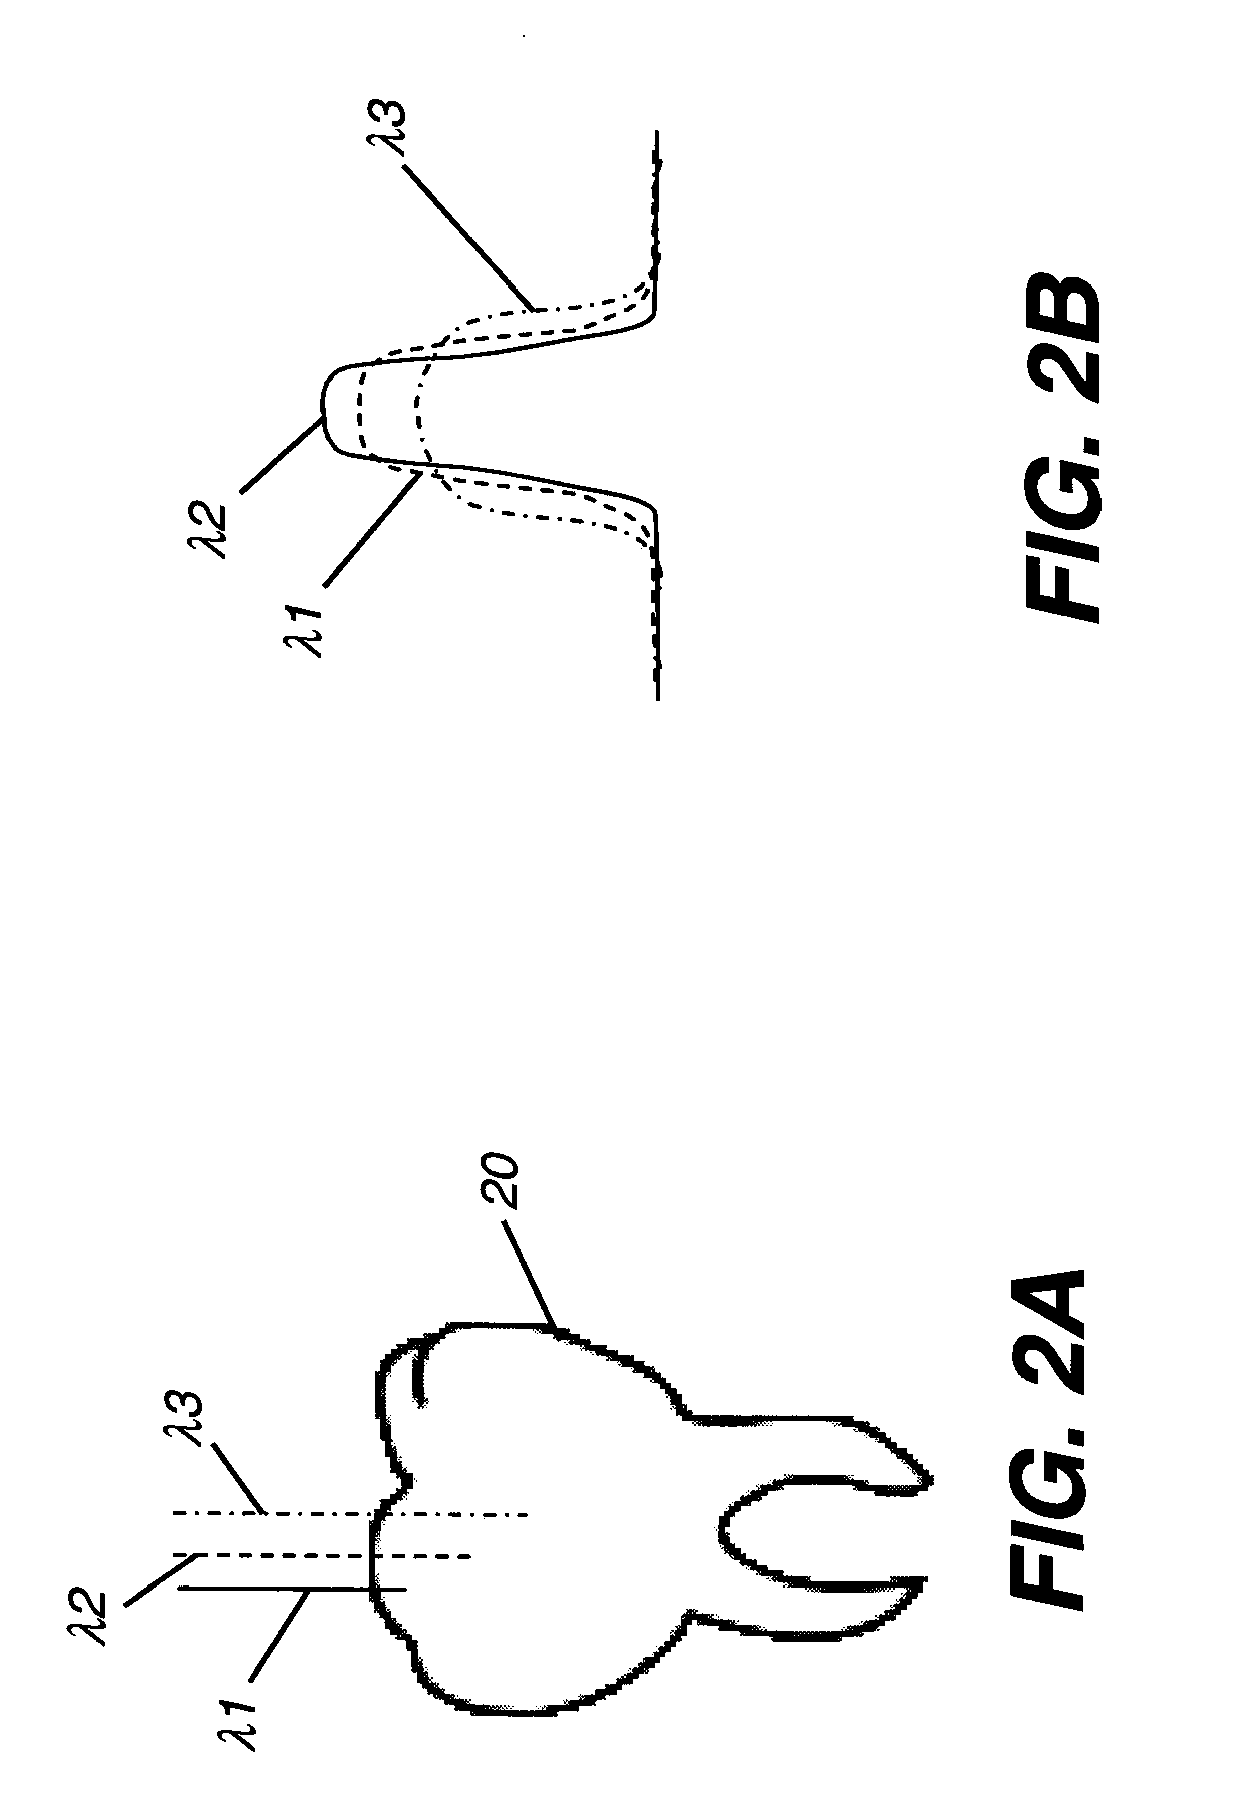 Apparatus for dental surface shape and shade imaging